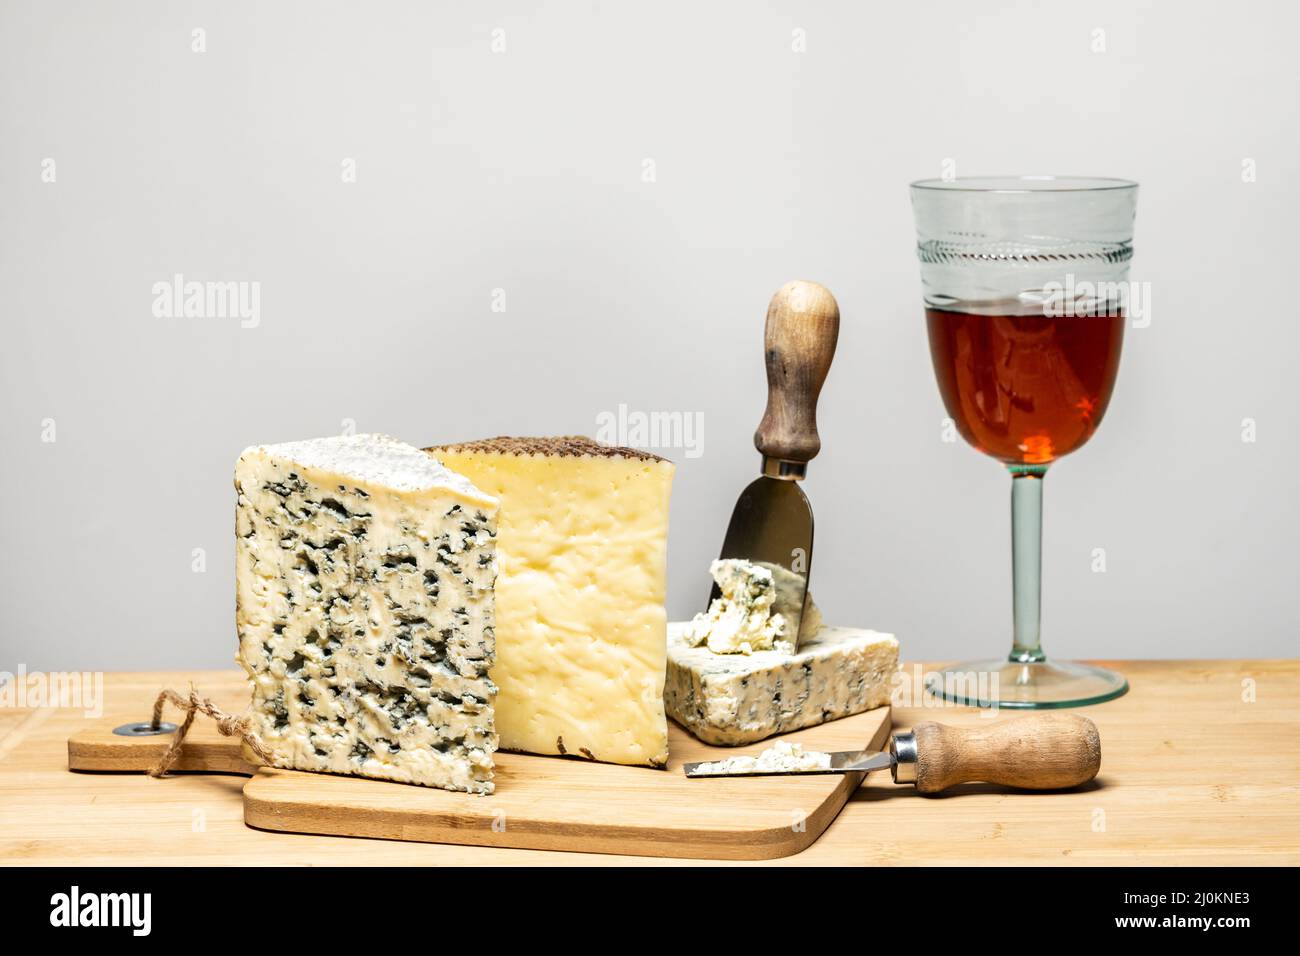 Delicious cheese wedges of different varieties with specialized cheese knives and a glass of Spanish wine on a cutting board eaten in turn on top of a Stock Photo